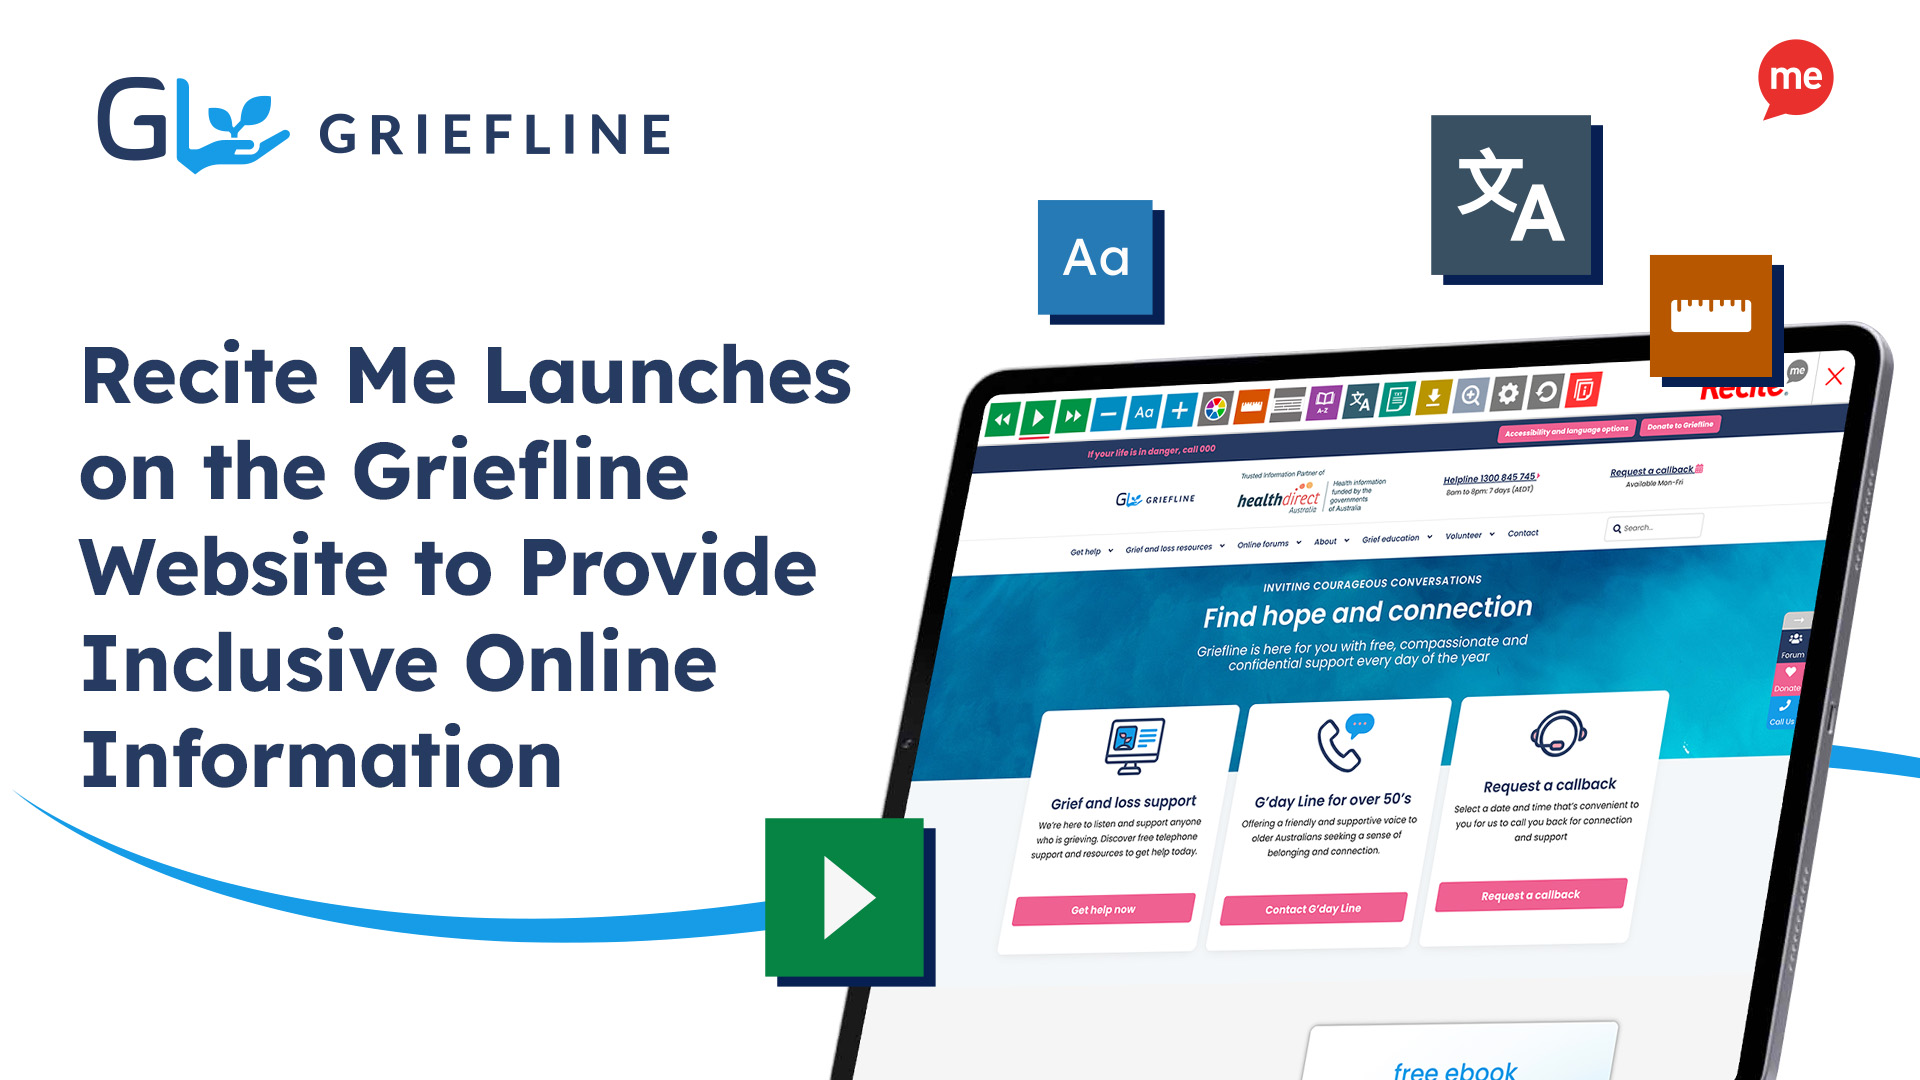 Recite Me Launches on the Griefline Website to Provide Inclusive Online Information